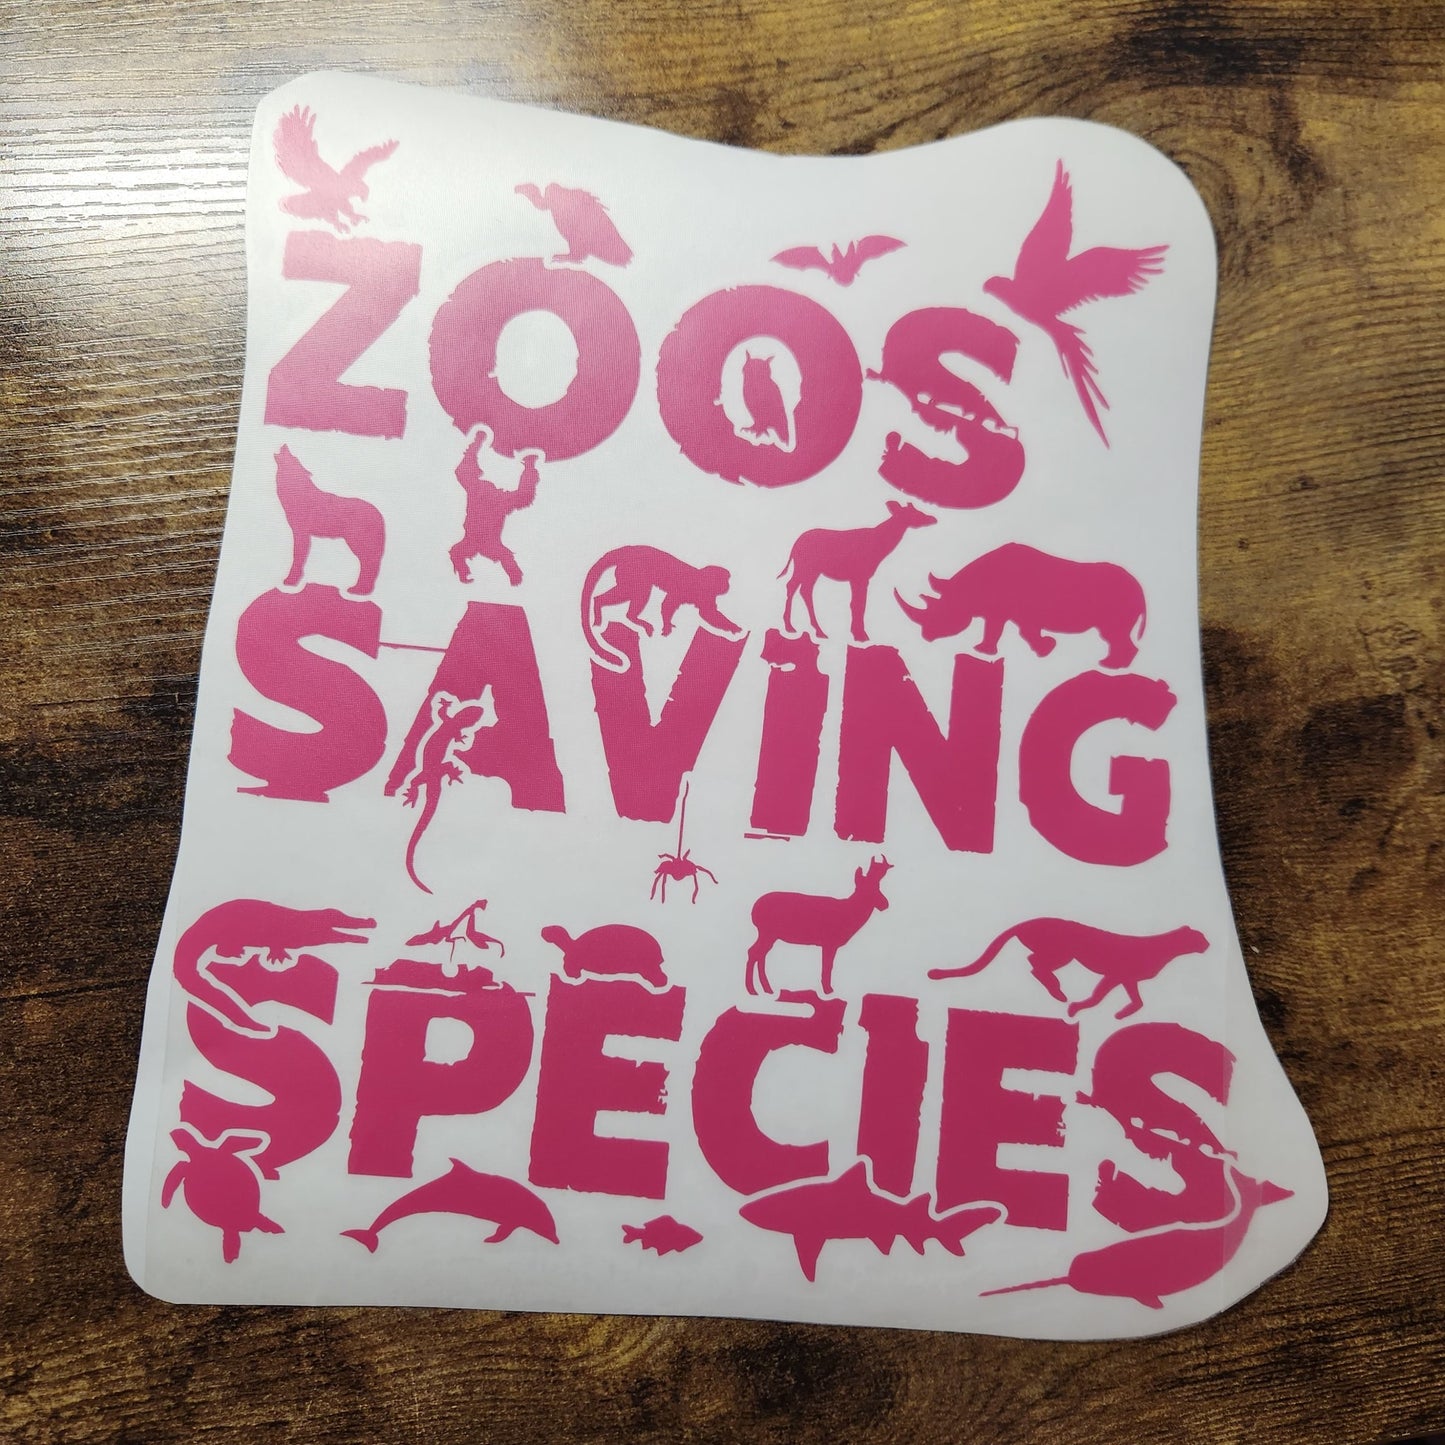 Zoos Saving Species - Decal (Made to Order)